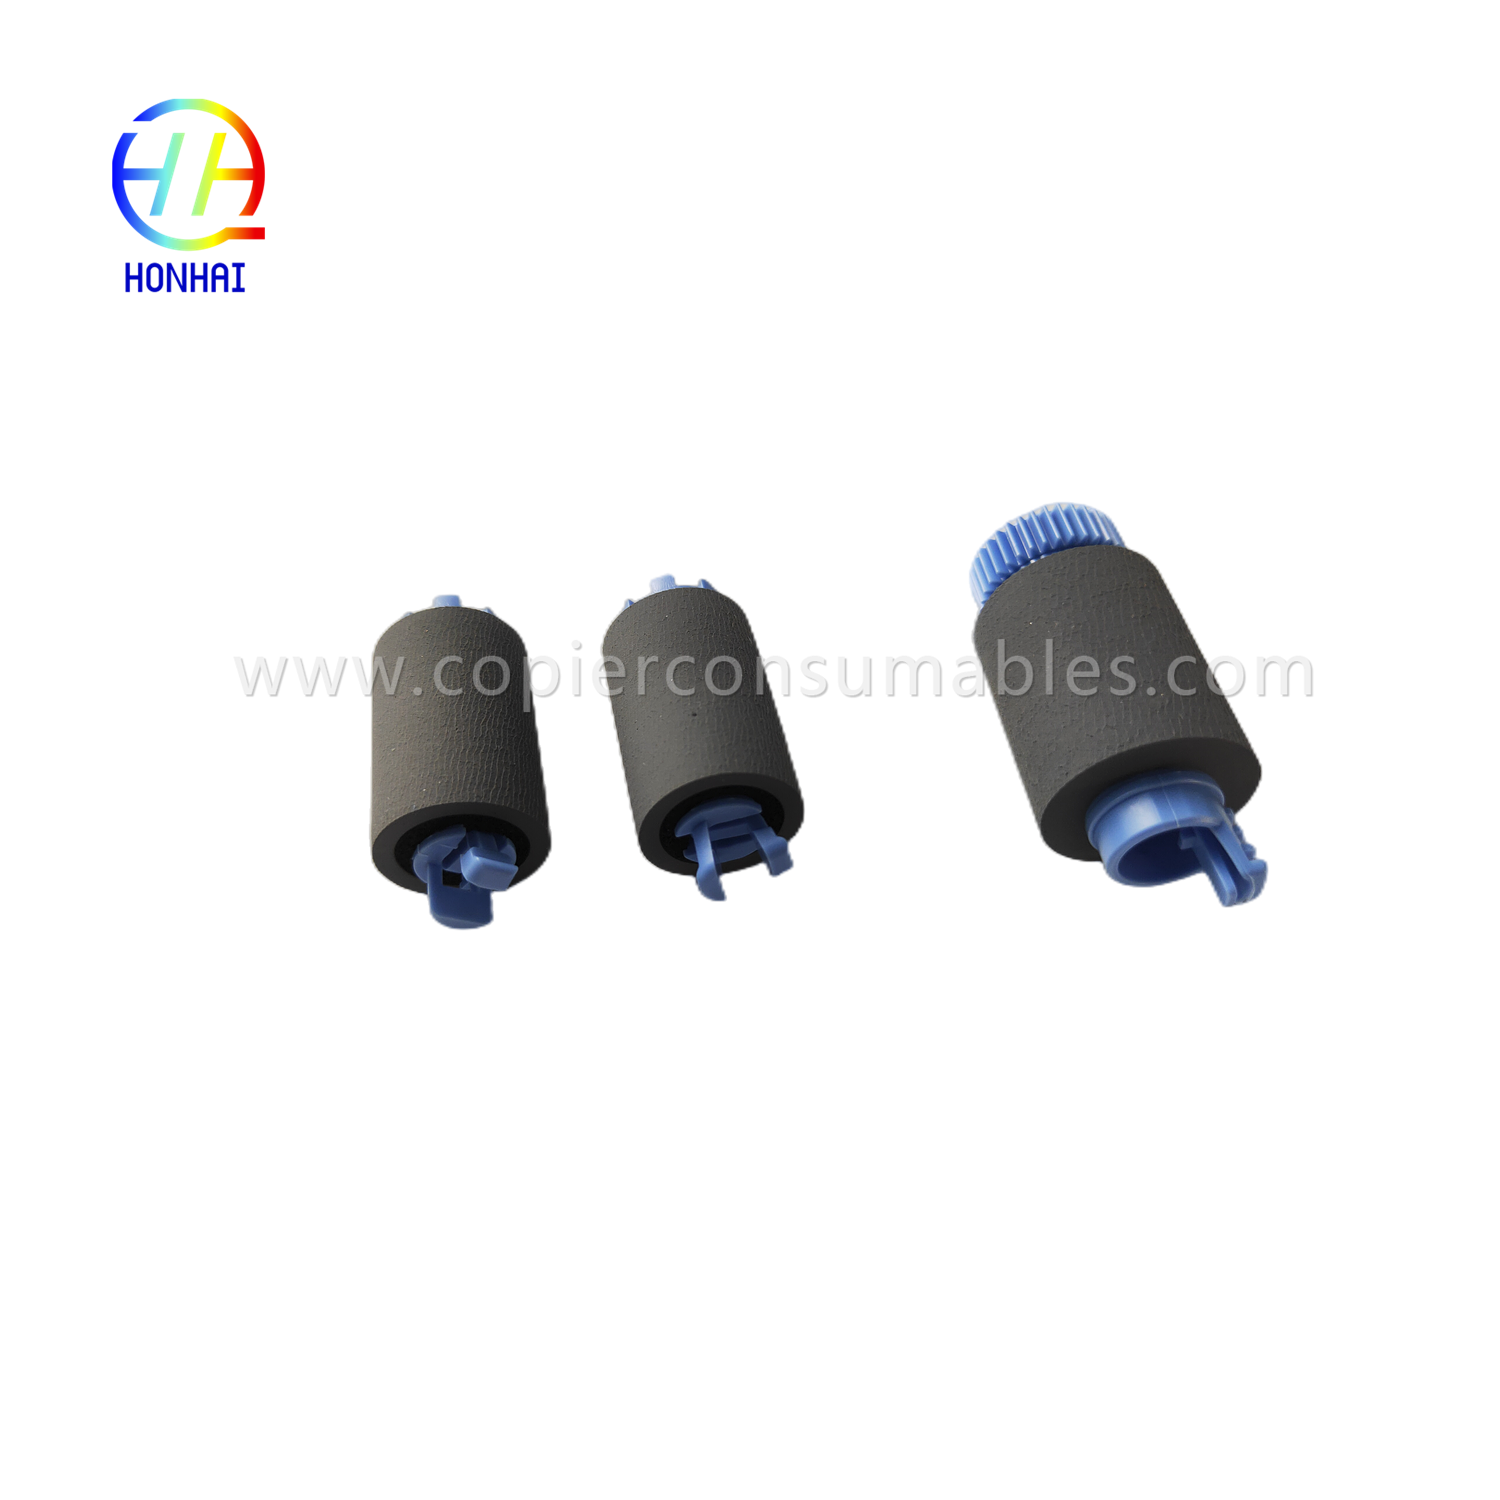 https://c585.goodao.net/tray-2-5-pickup-feed-separation-roller-set-for-hp-a7w93-67082-mfp-785f-780dn-e77650z-e77660z-e77650dn-e77660dn-p77740dn- p77750z-p77760z-p75050dn-p75050dw-product/